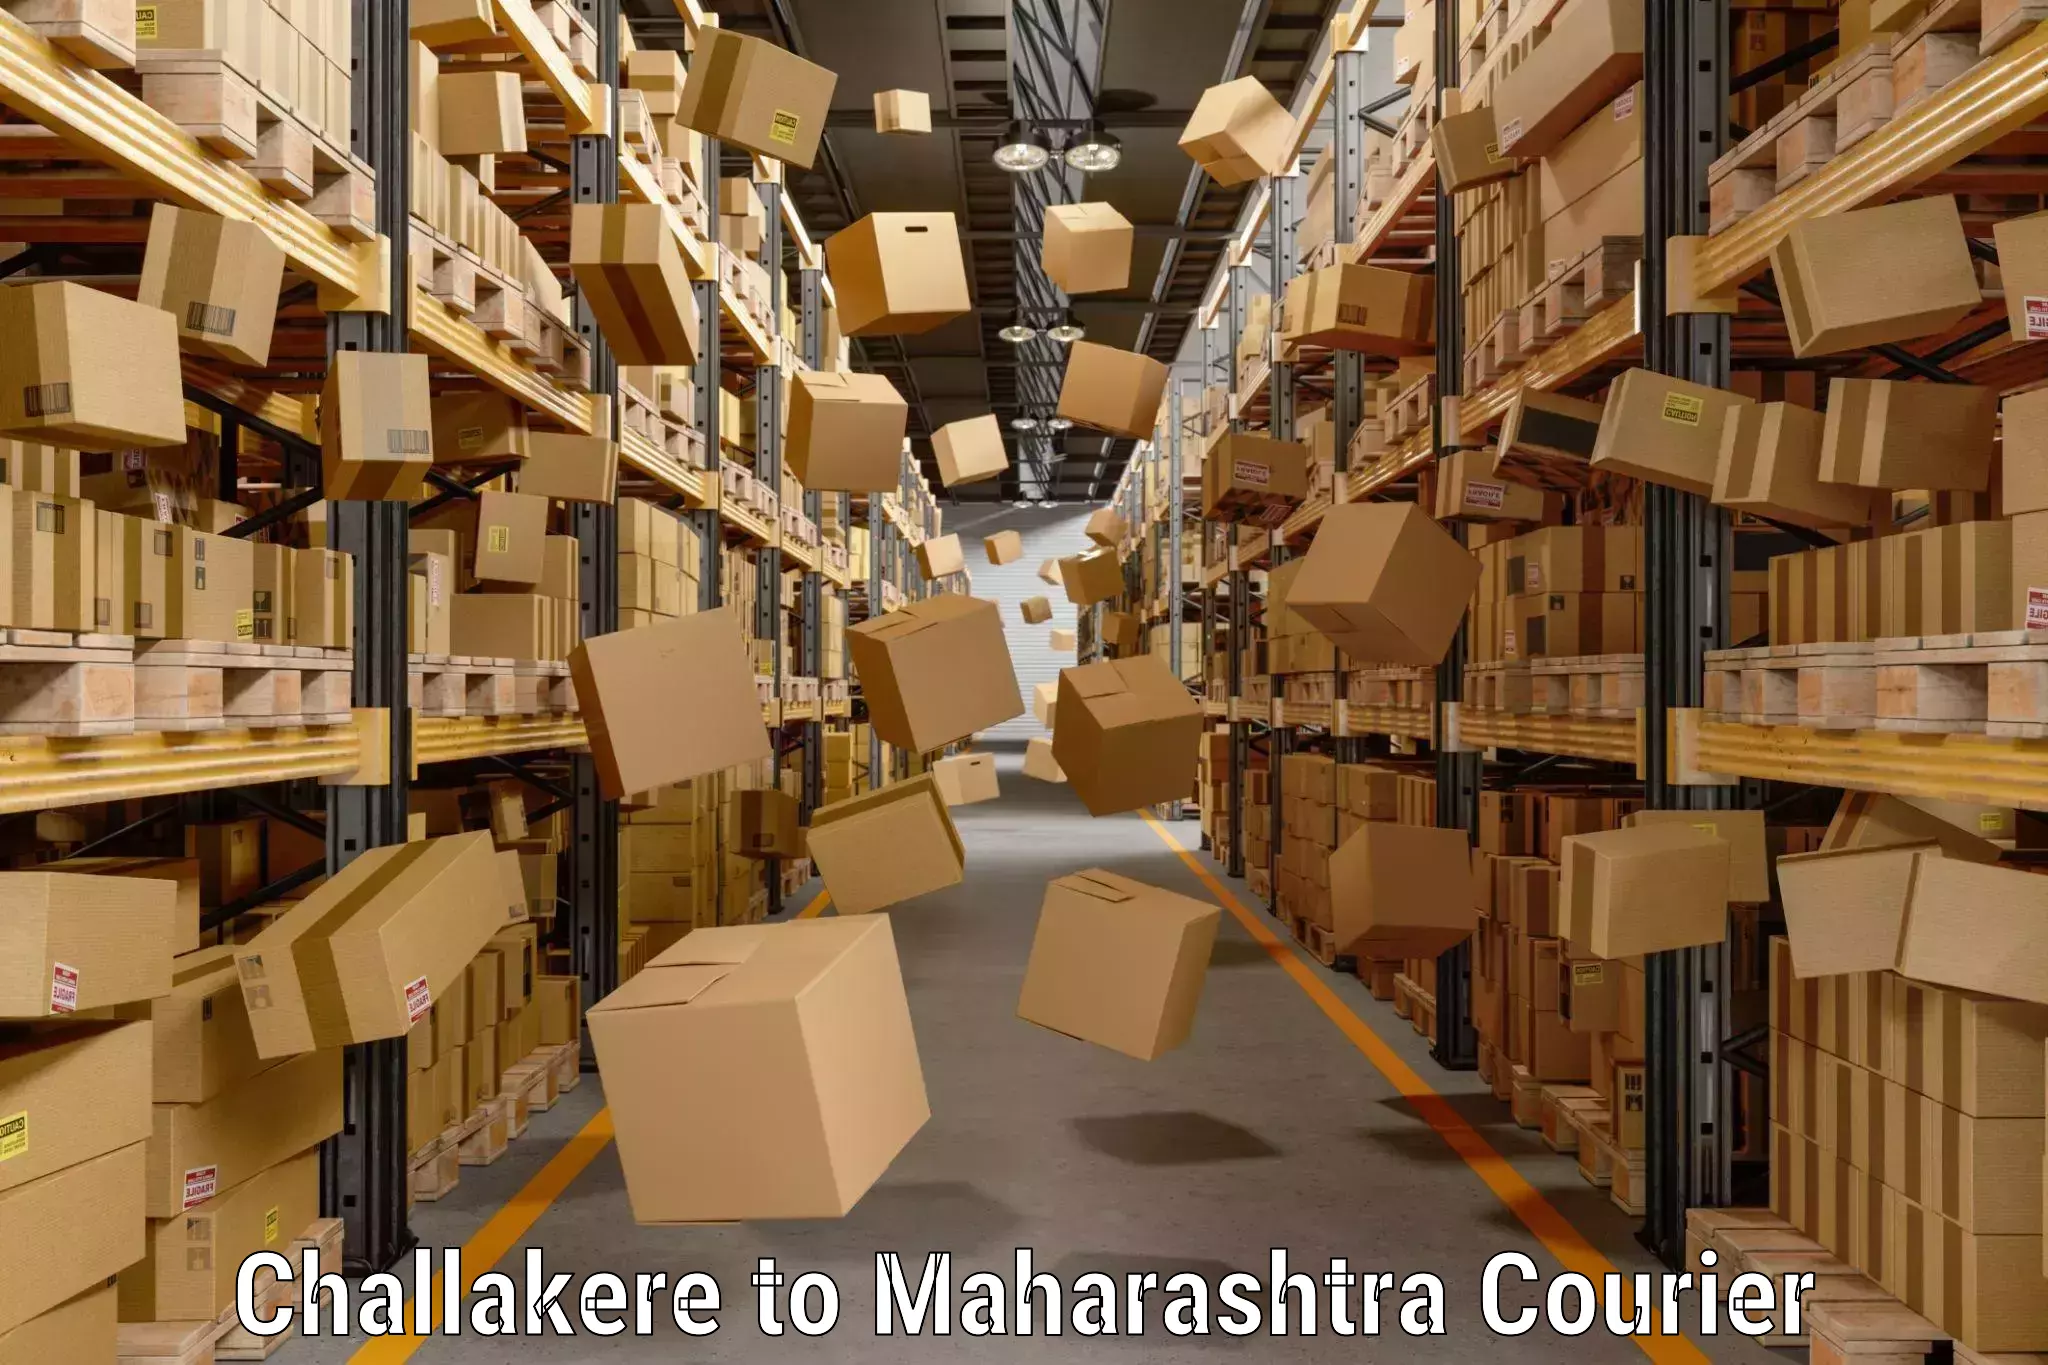 Luggage delivery network Challakere to Maharashtra